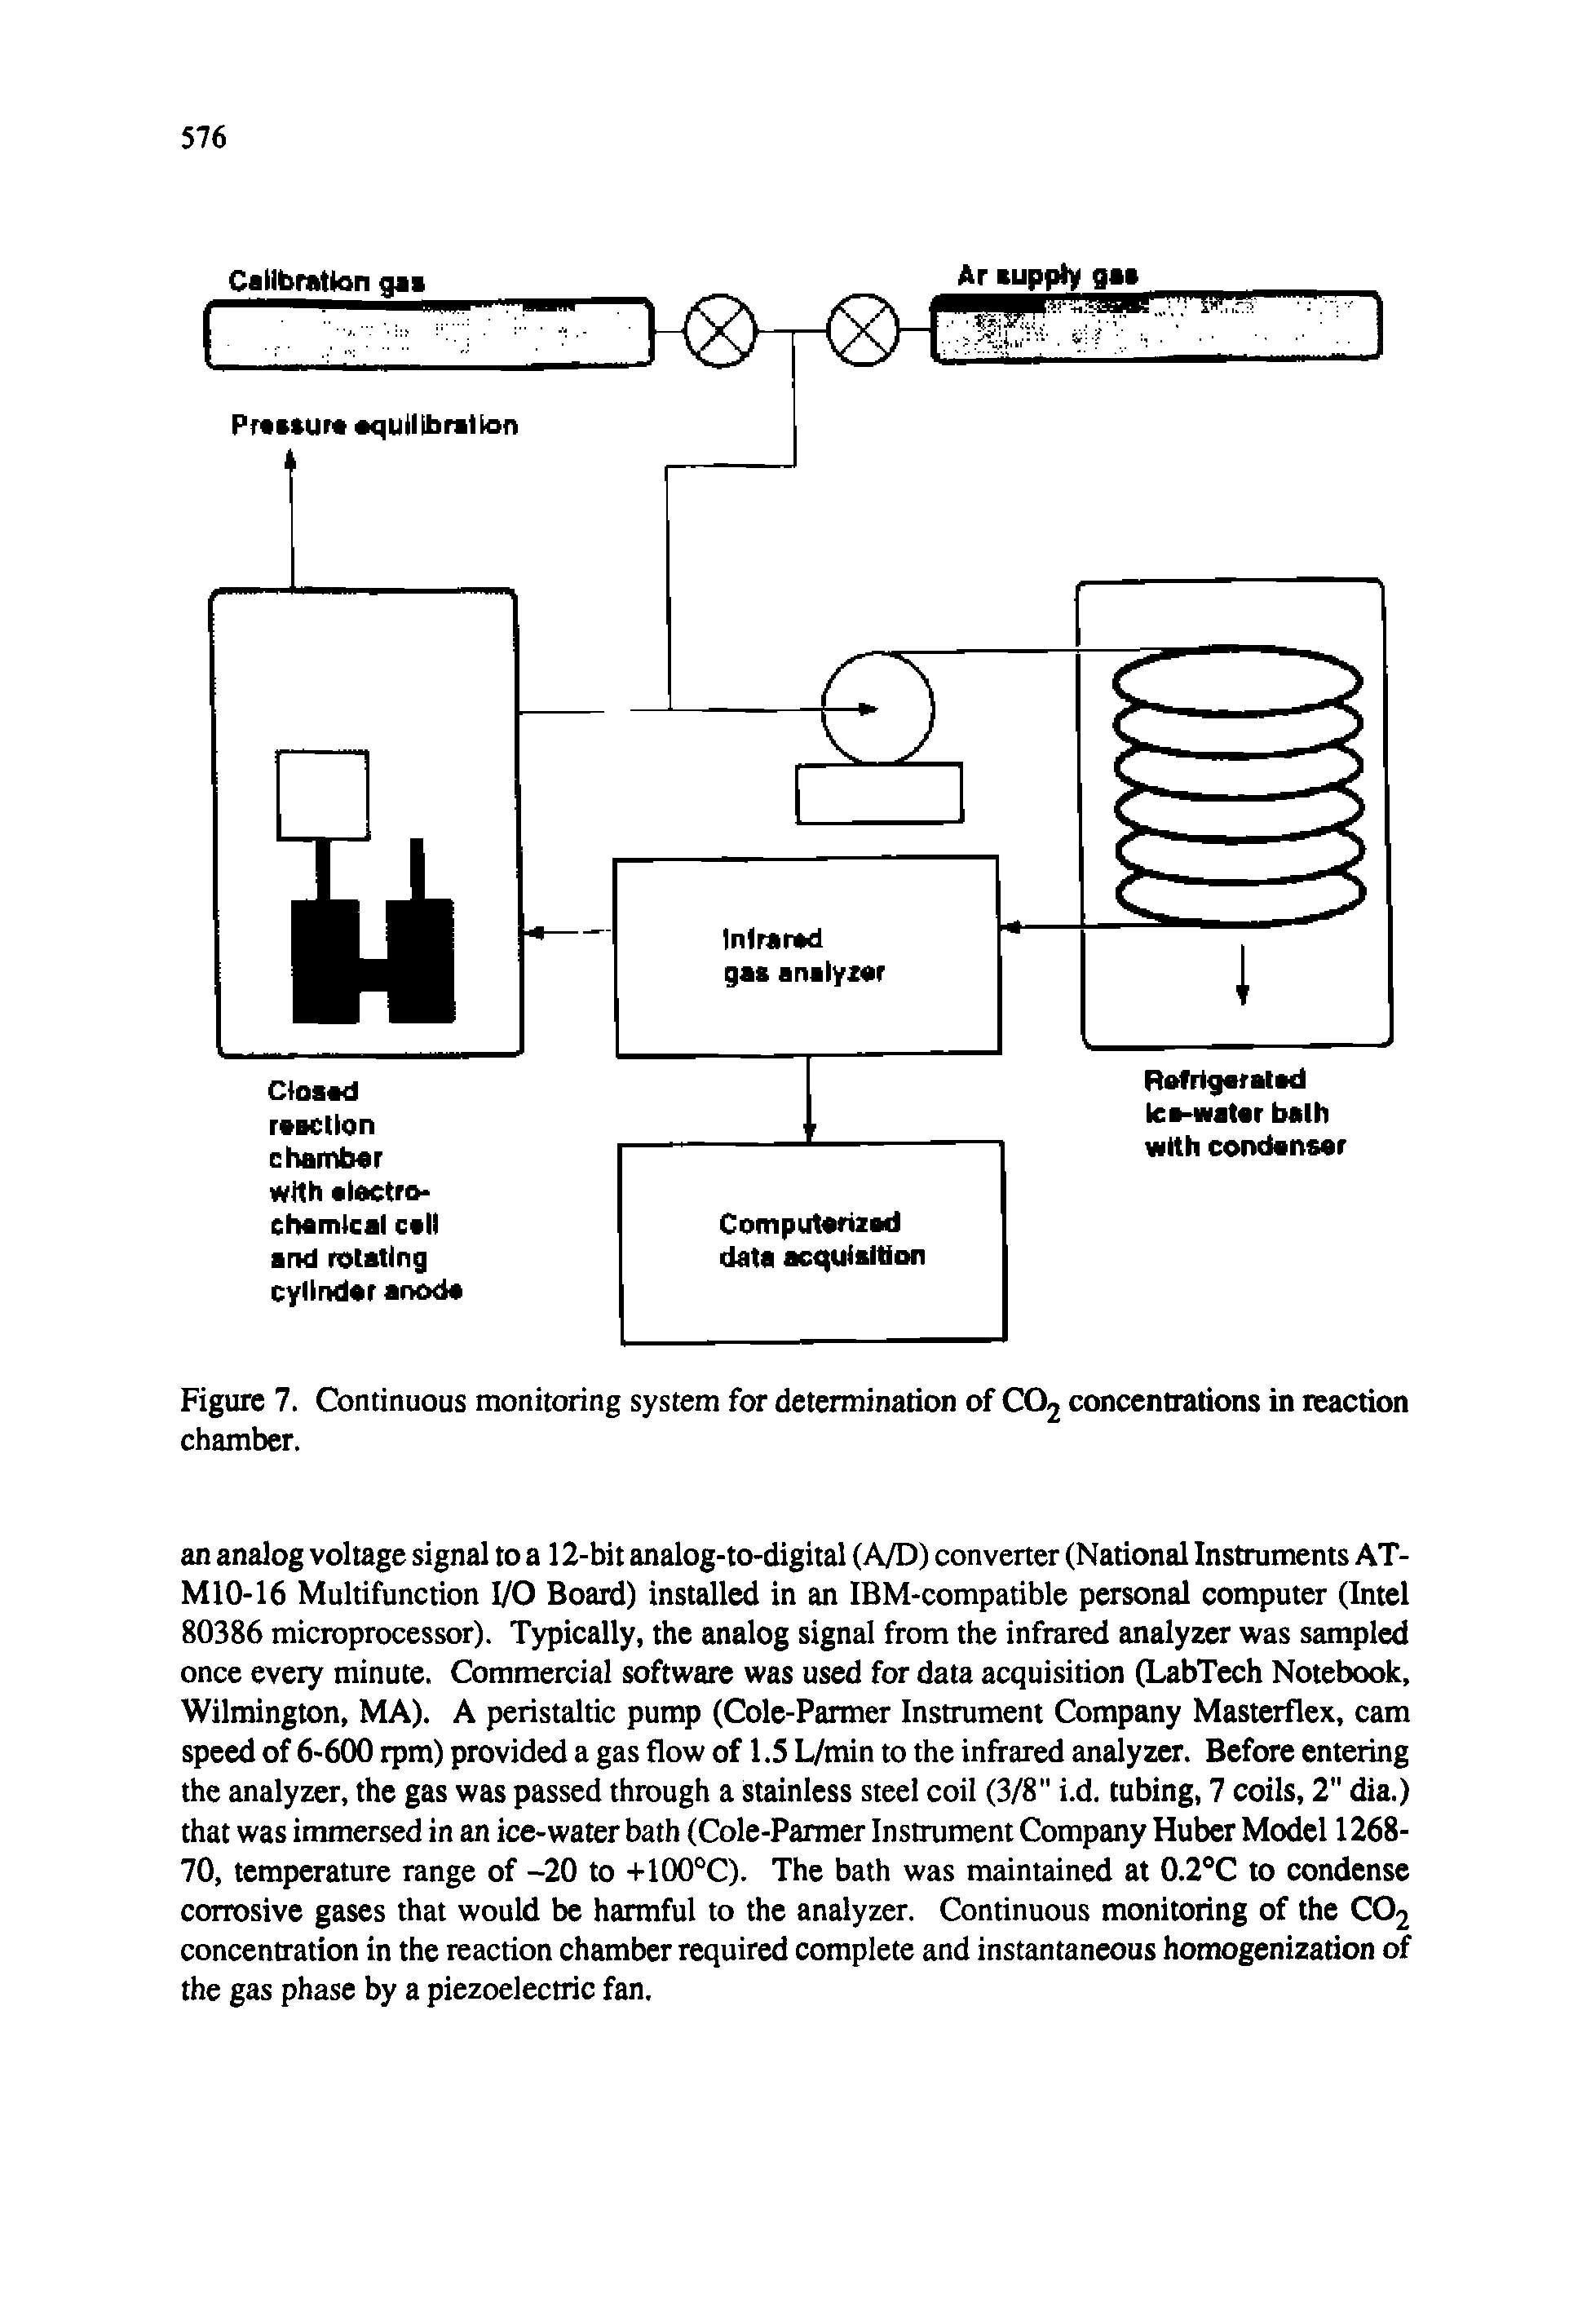 Figure 7. Continuous monitoring system for determination of CO2 concentrations in reaction chamber.